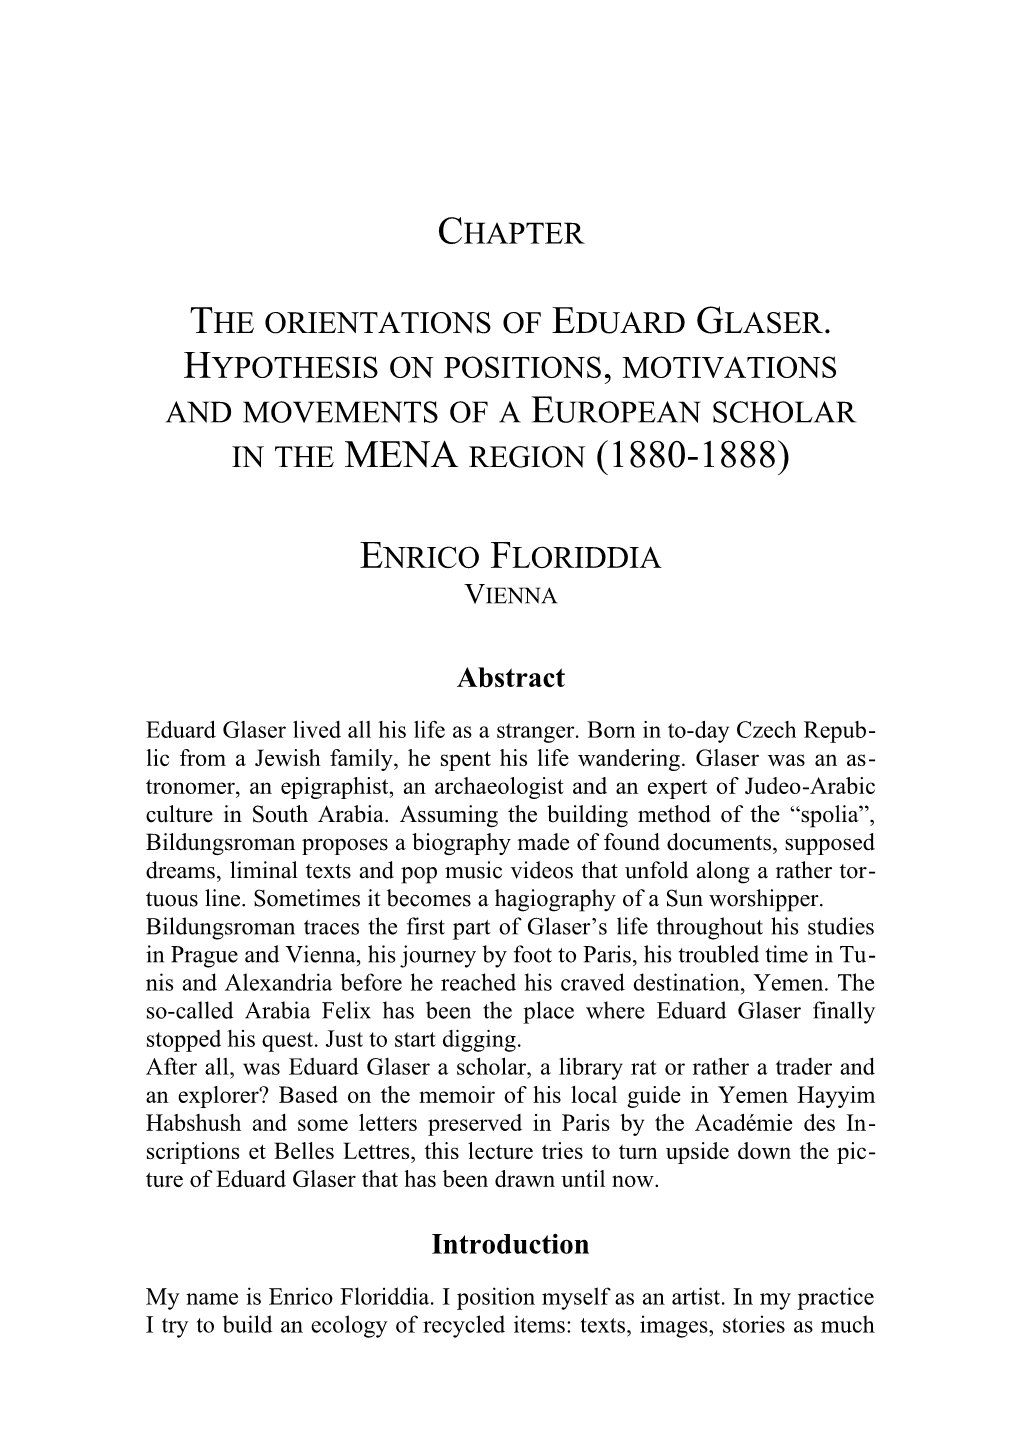 The Orientations of Eduard Glaser. Hypothesis on Positions, Motivations and Movements of a European Scholar in the Mena Region (1880-1888)